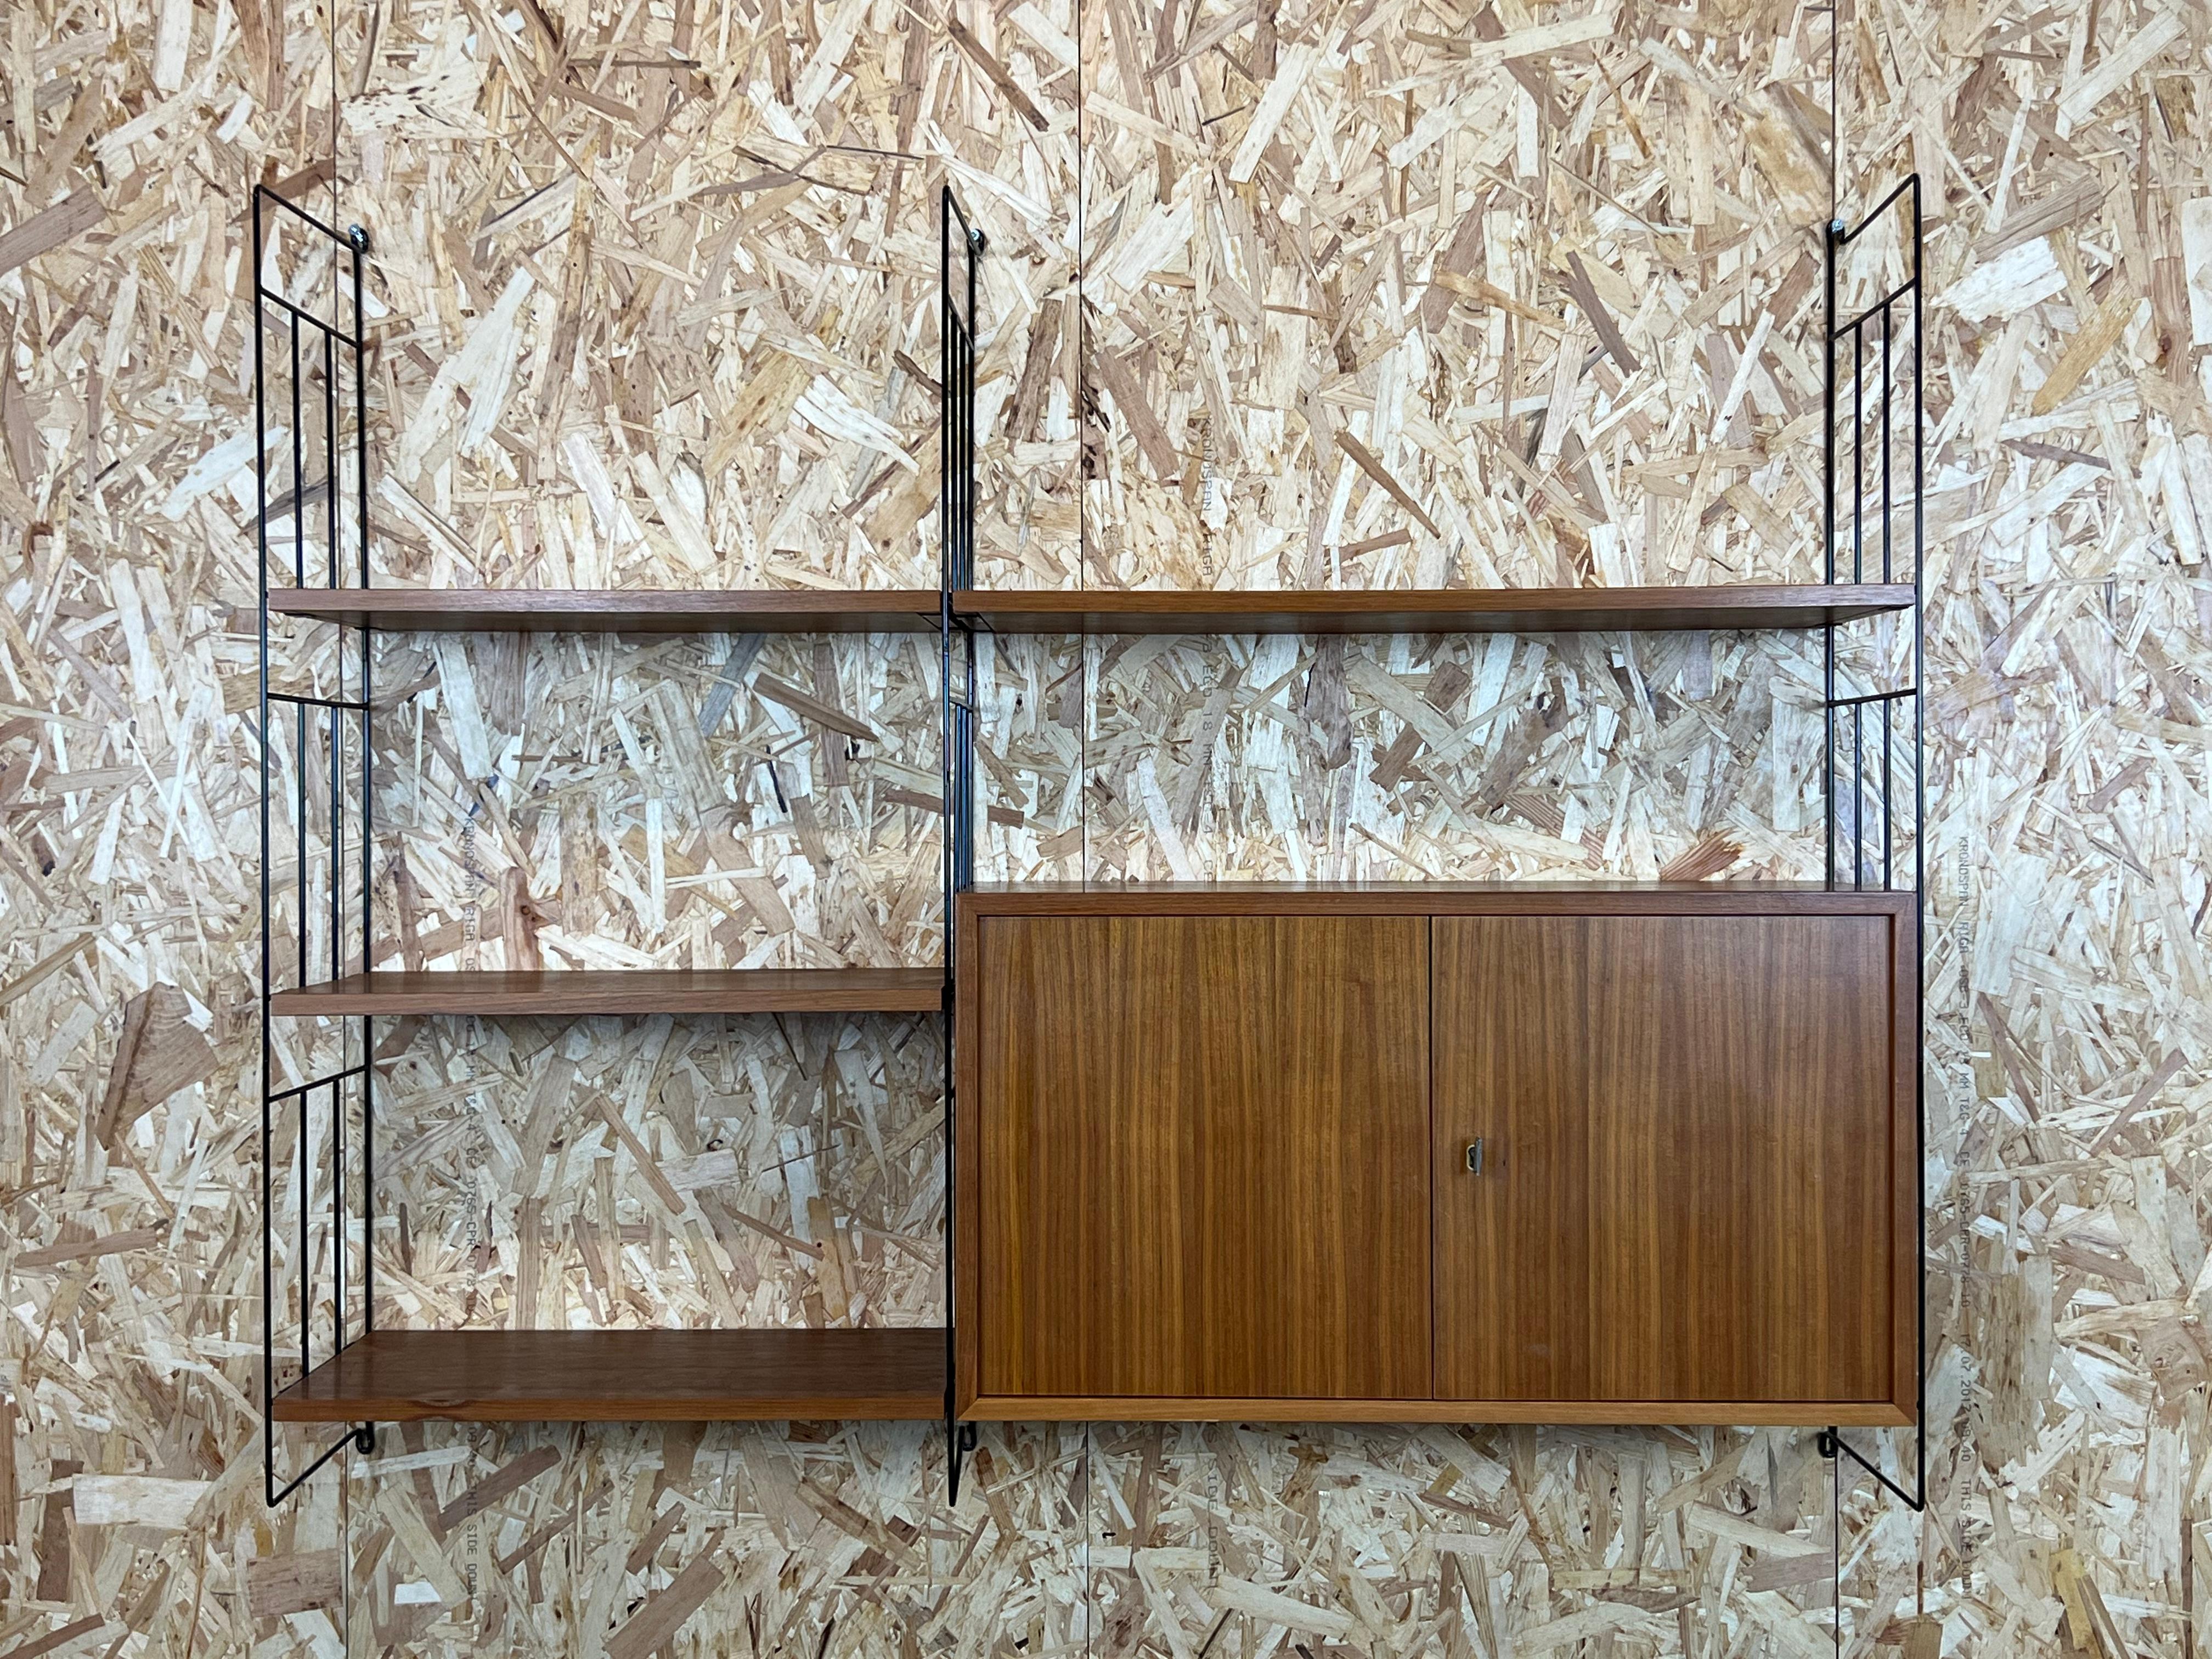 60s 70s teak shelf wall shelf WHB Germany string shelf Danish design

Object: wall shelf

Manufacturer: WHB

Condition: good

Age: around 1960-1970

Dimensions:

123.5cm x 26.5cm x 102cm

Other notes:

The pictures serve as part of